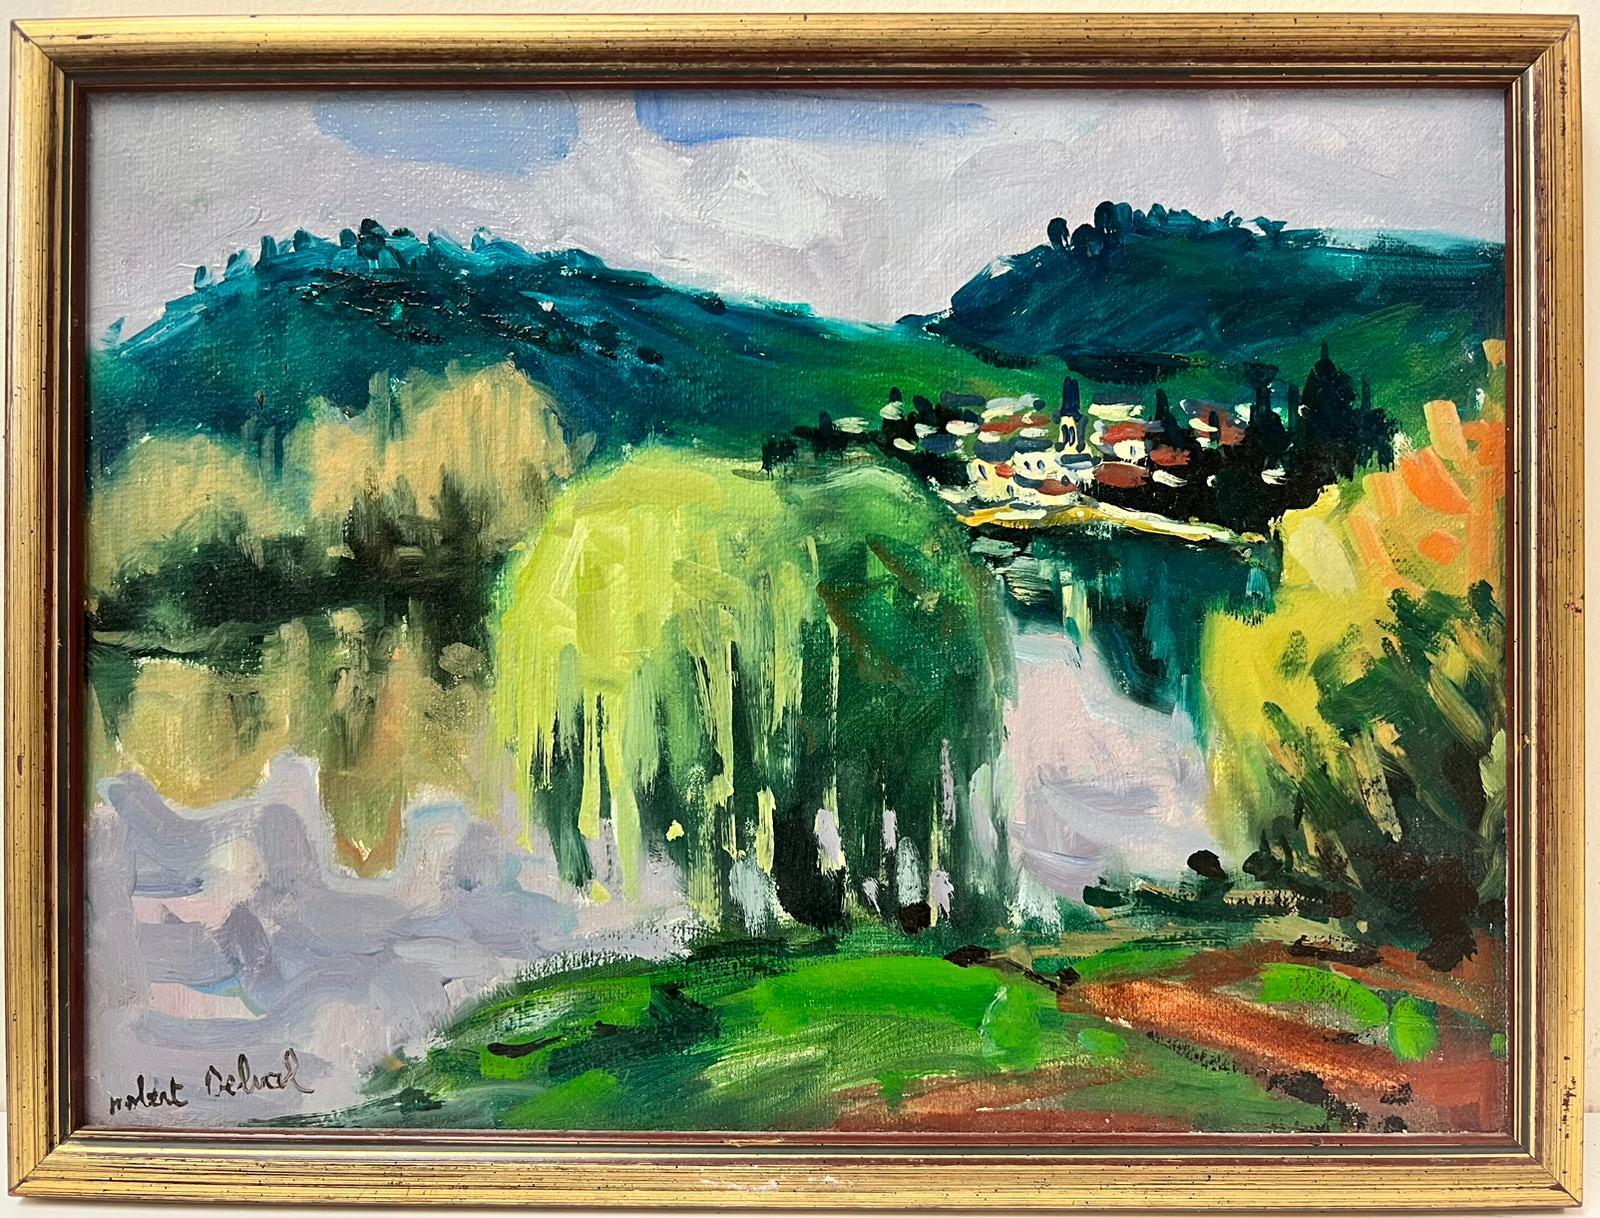 The River Seine
French School, circa 1981
signed lower corner and titled verso
oil painting on board, framed
framed: 13 x 20.5 inches
board: 12 x 19.5 inches
provenance: private collection, France
condition: very good and sound condition 
